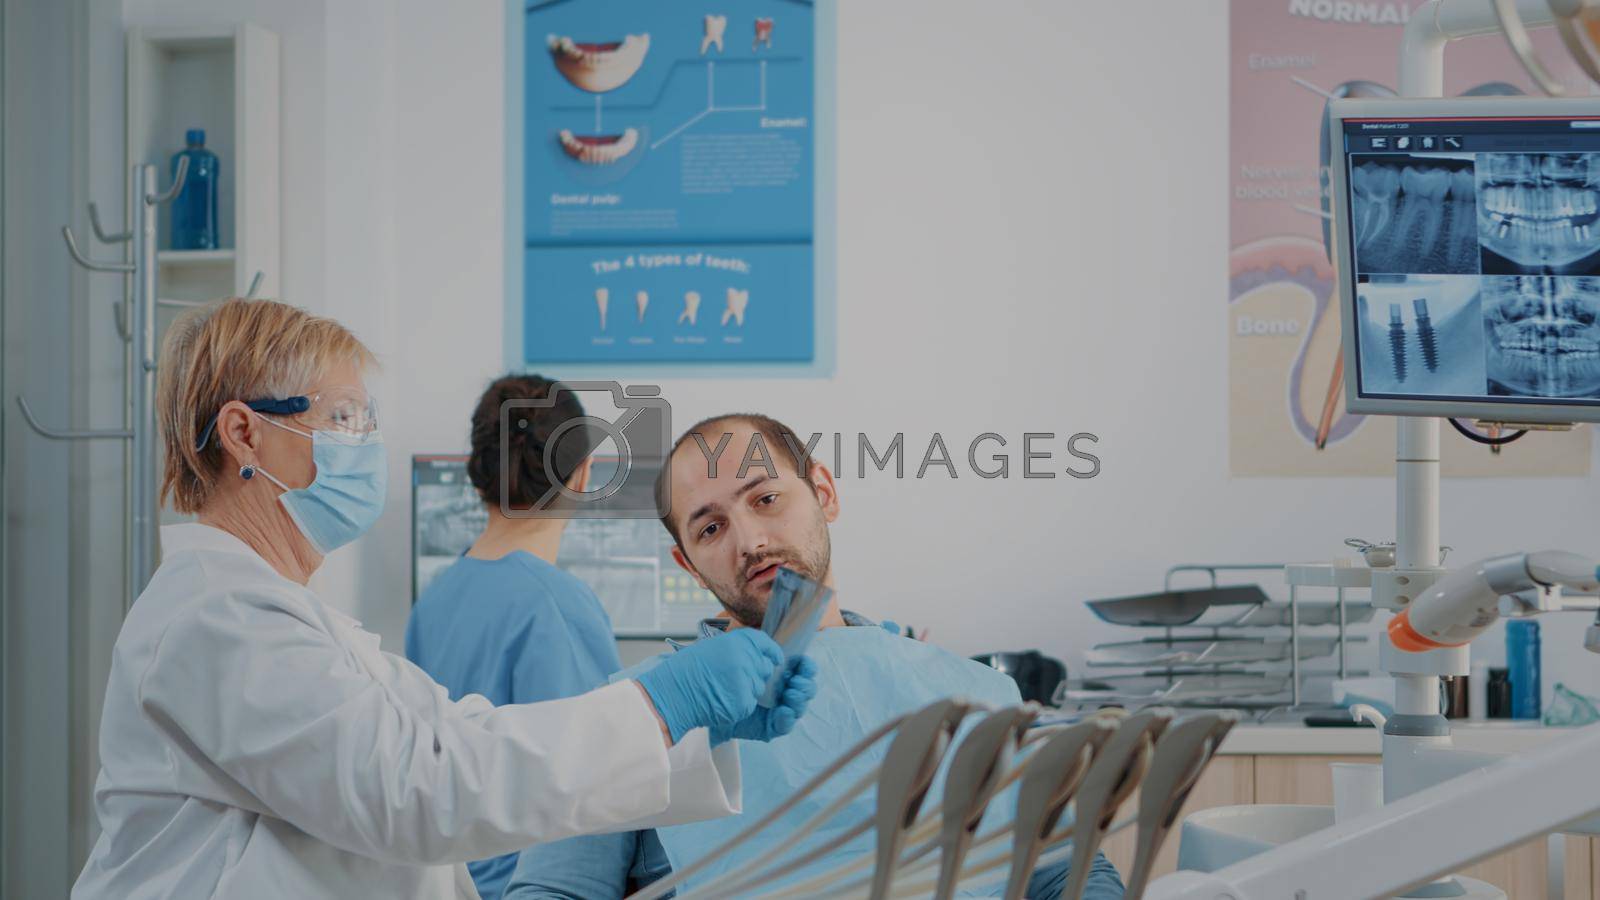 Senior dentist explaining teeth radiography to patient with caries problems. Stomatologist using x ray scan results to do dental examination and drill procedure at dentistry checkup.